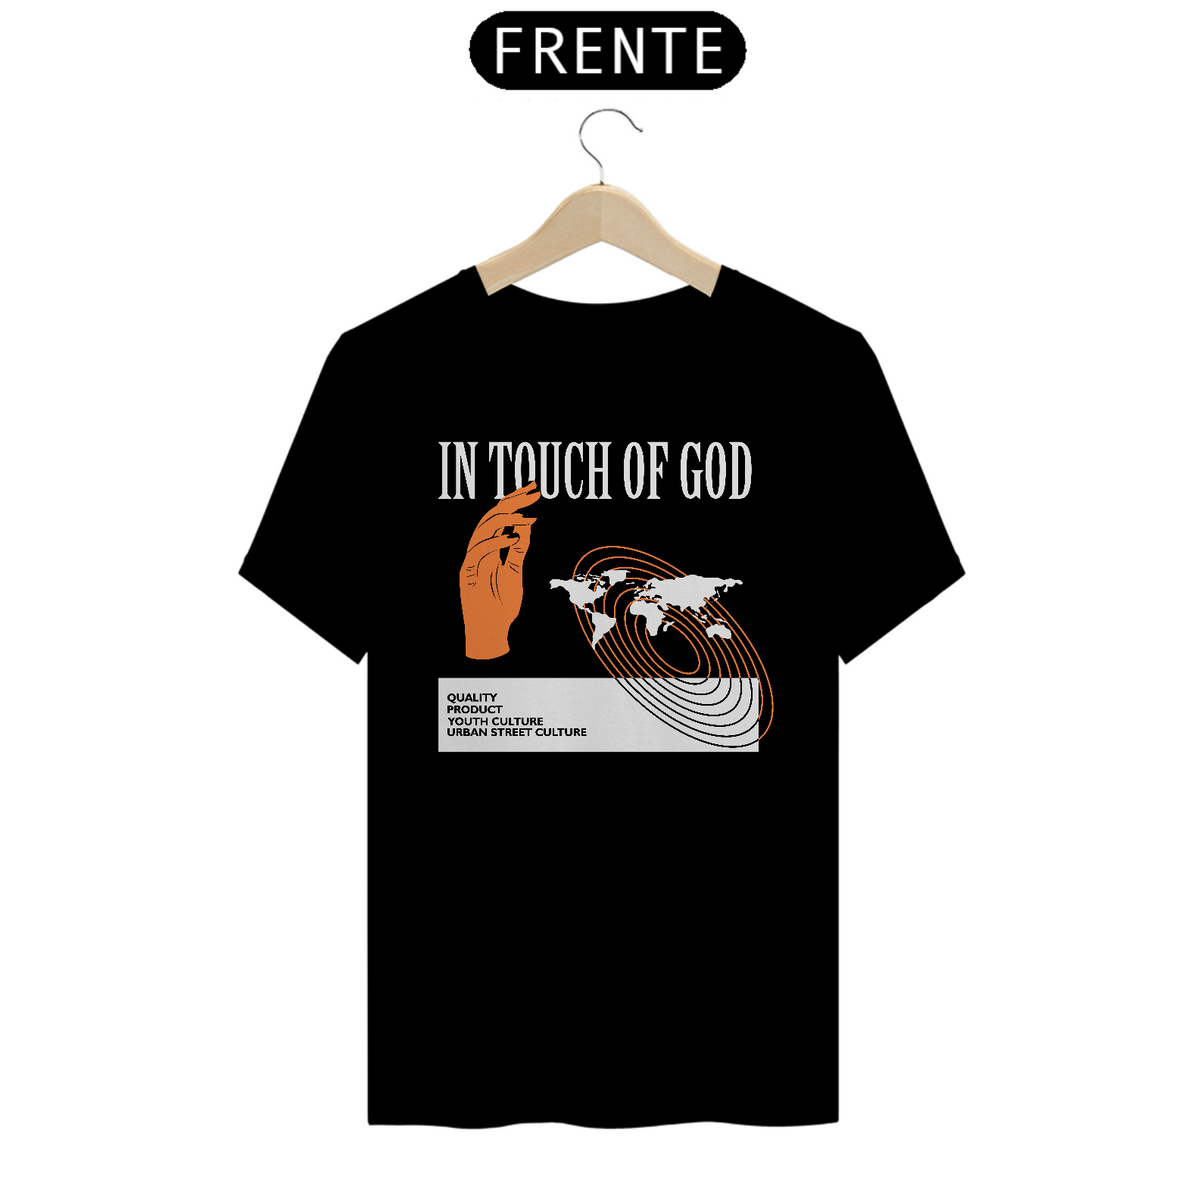 Nome do produto: In Touch of God ©